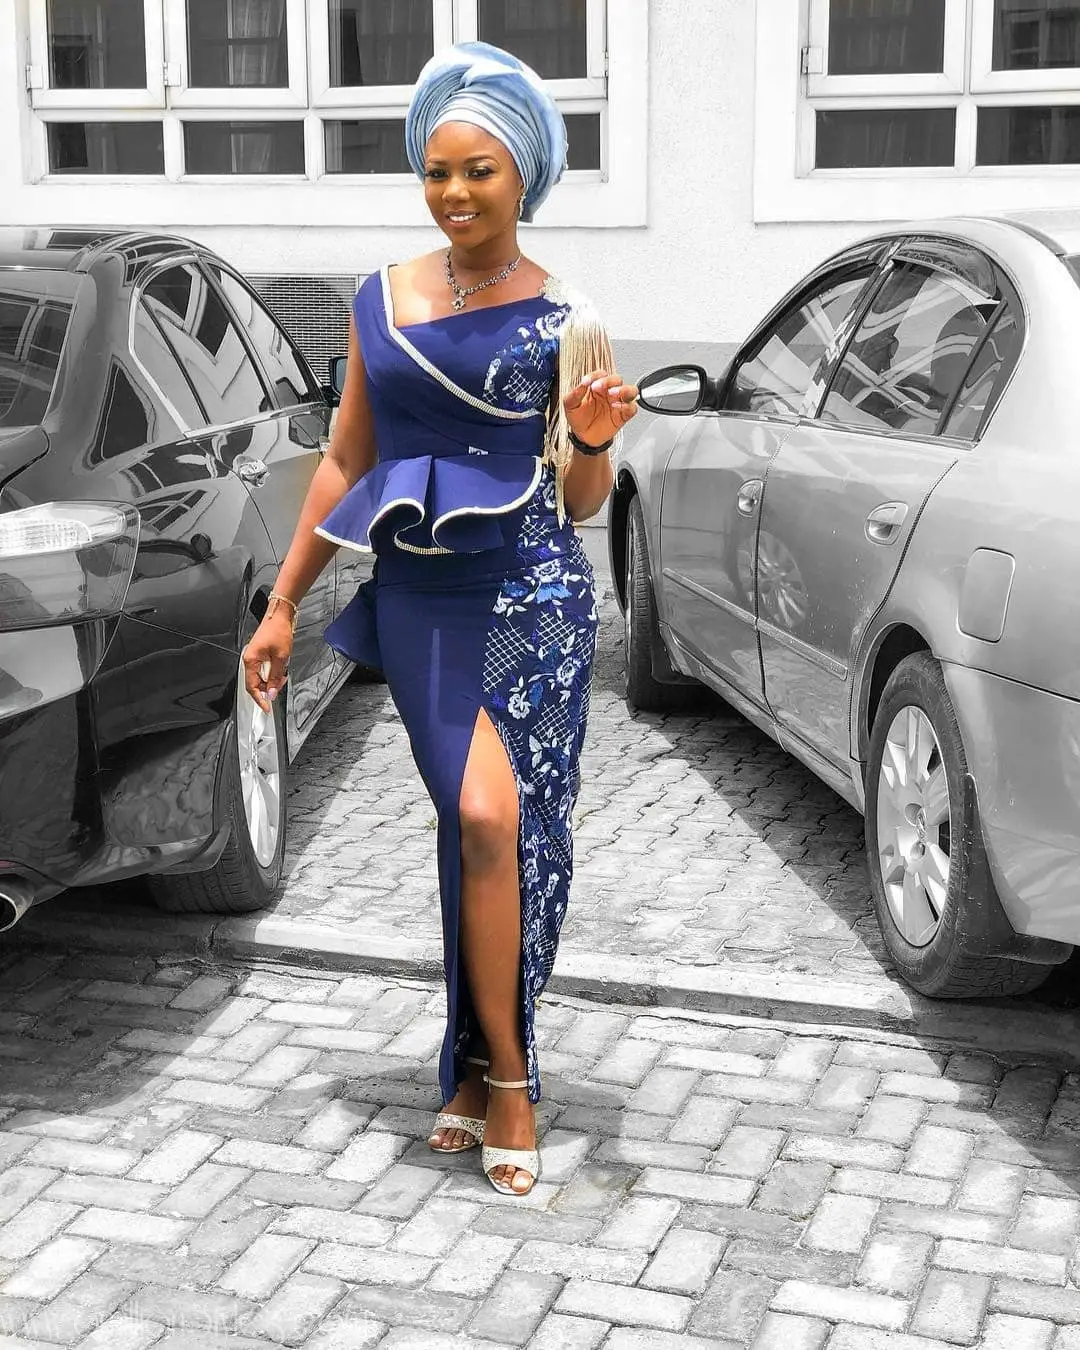 The Blue Lace Asoebi Styles At Tomike's Wedding Blu Us Away!